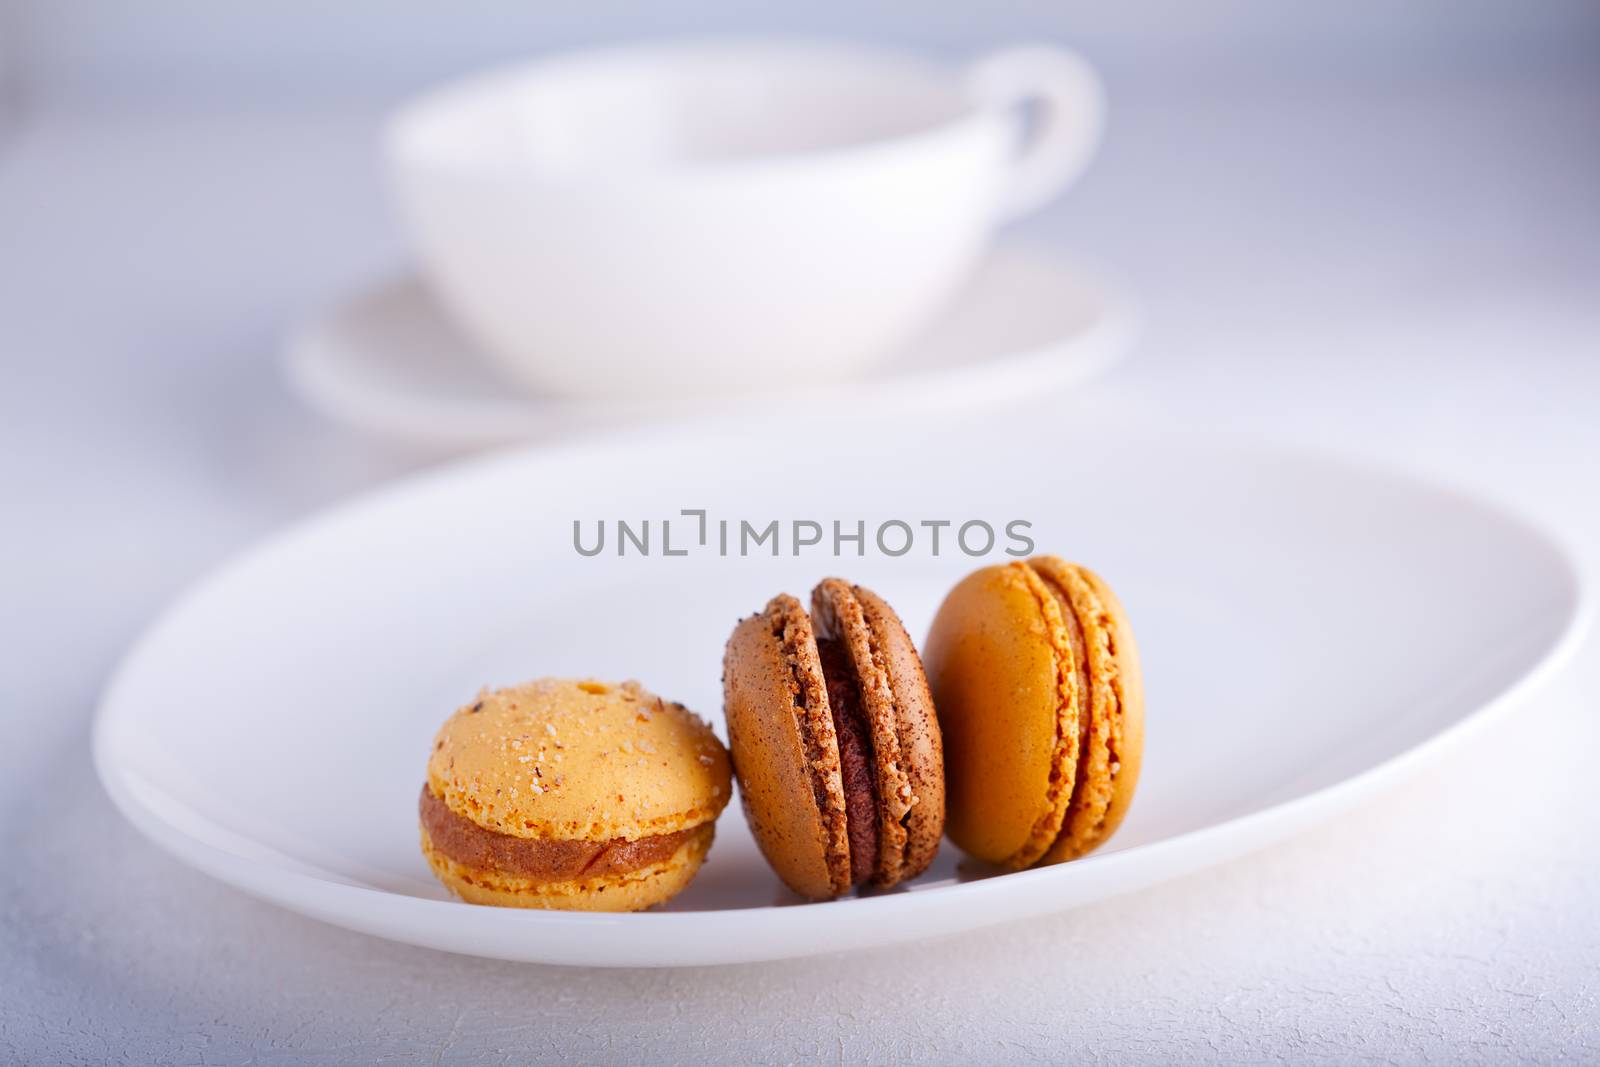 Almond cookies French macaroons on a white surface